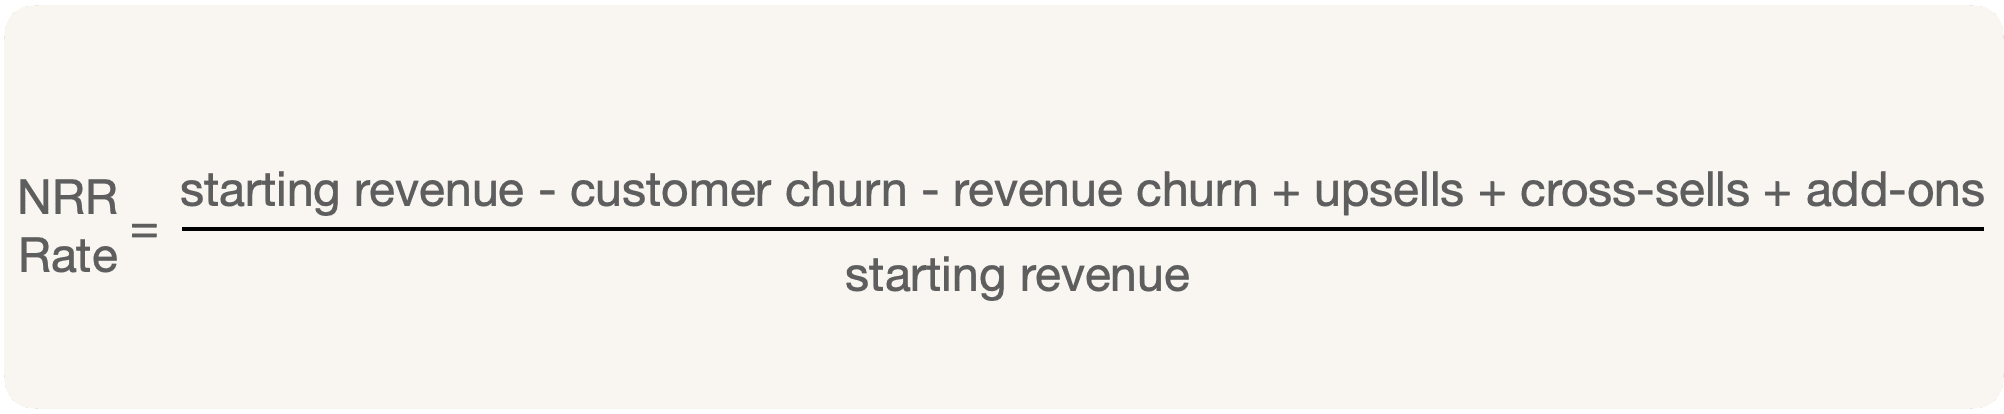 NRR Rate is the ratio of starting revenue minus churn plus expansion and the starting revenue, for a given period